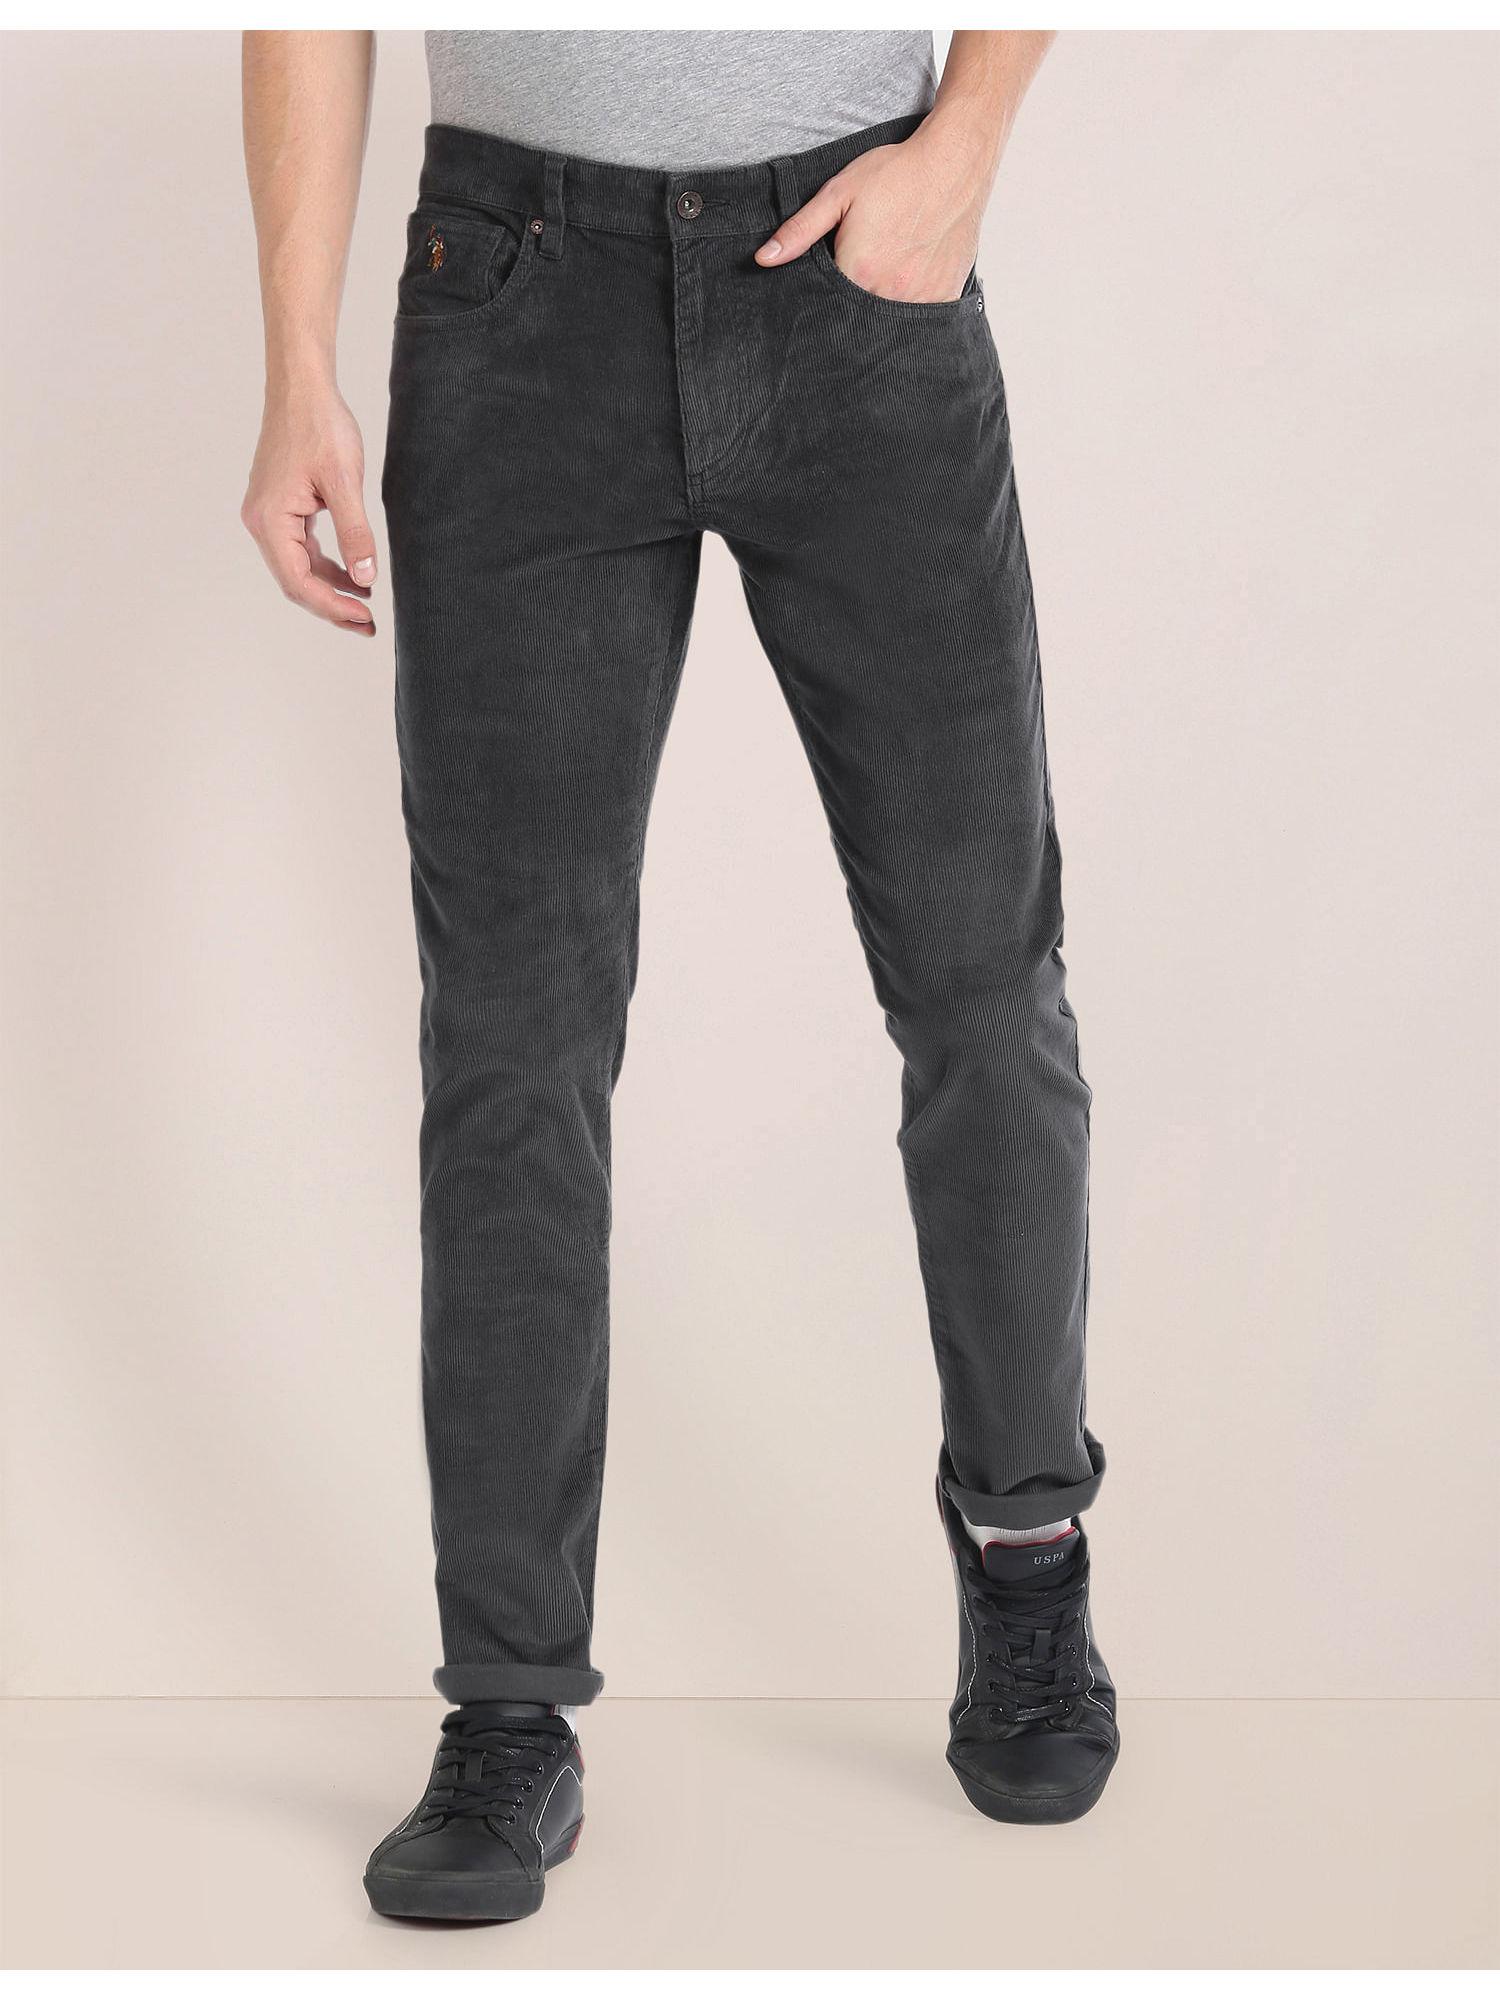 grey flat front corduroy casual trousers